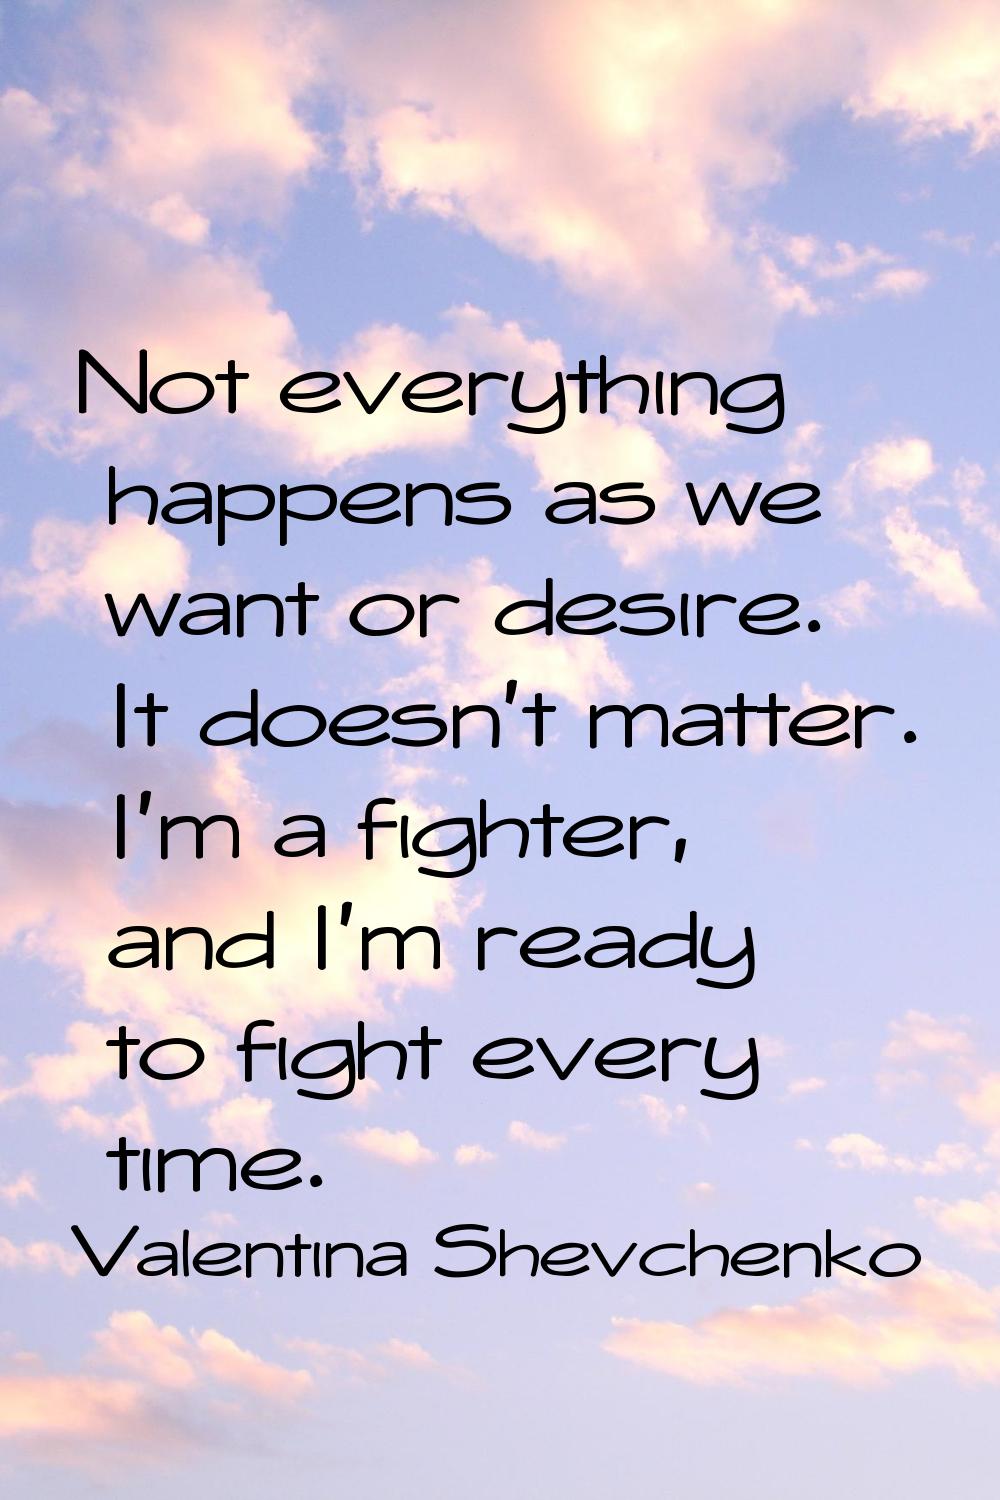 Not everything happens as we want or desire. It doesn't matter. I'm a fighter, and I'm ready to fig